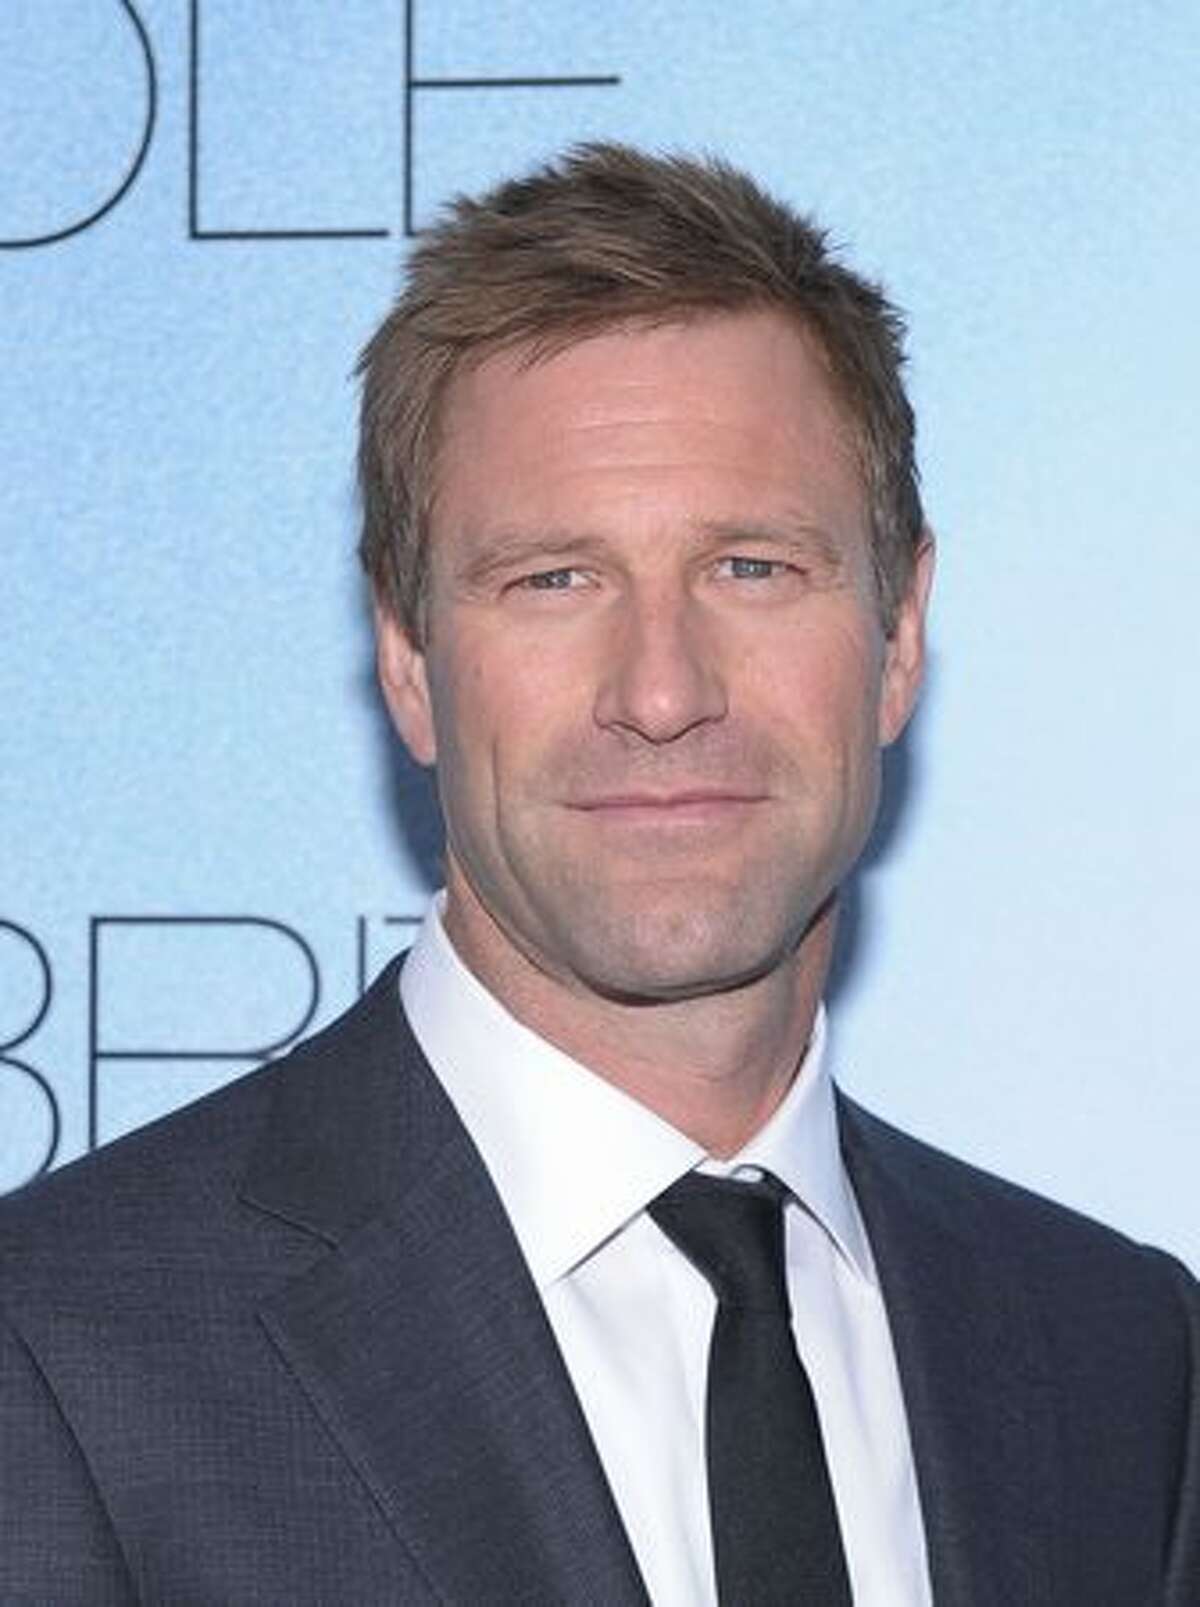 Actor Aaron Eckhart attends the premiere of "Rabbit Hole" at the Paris Theatre in New York City.